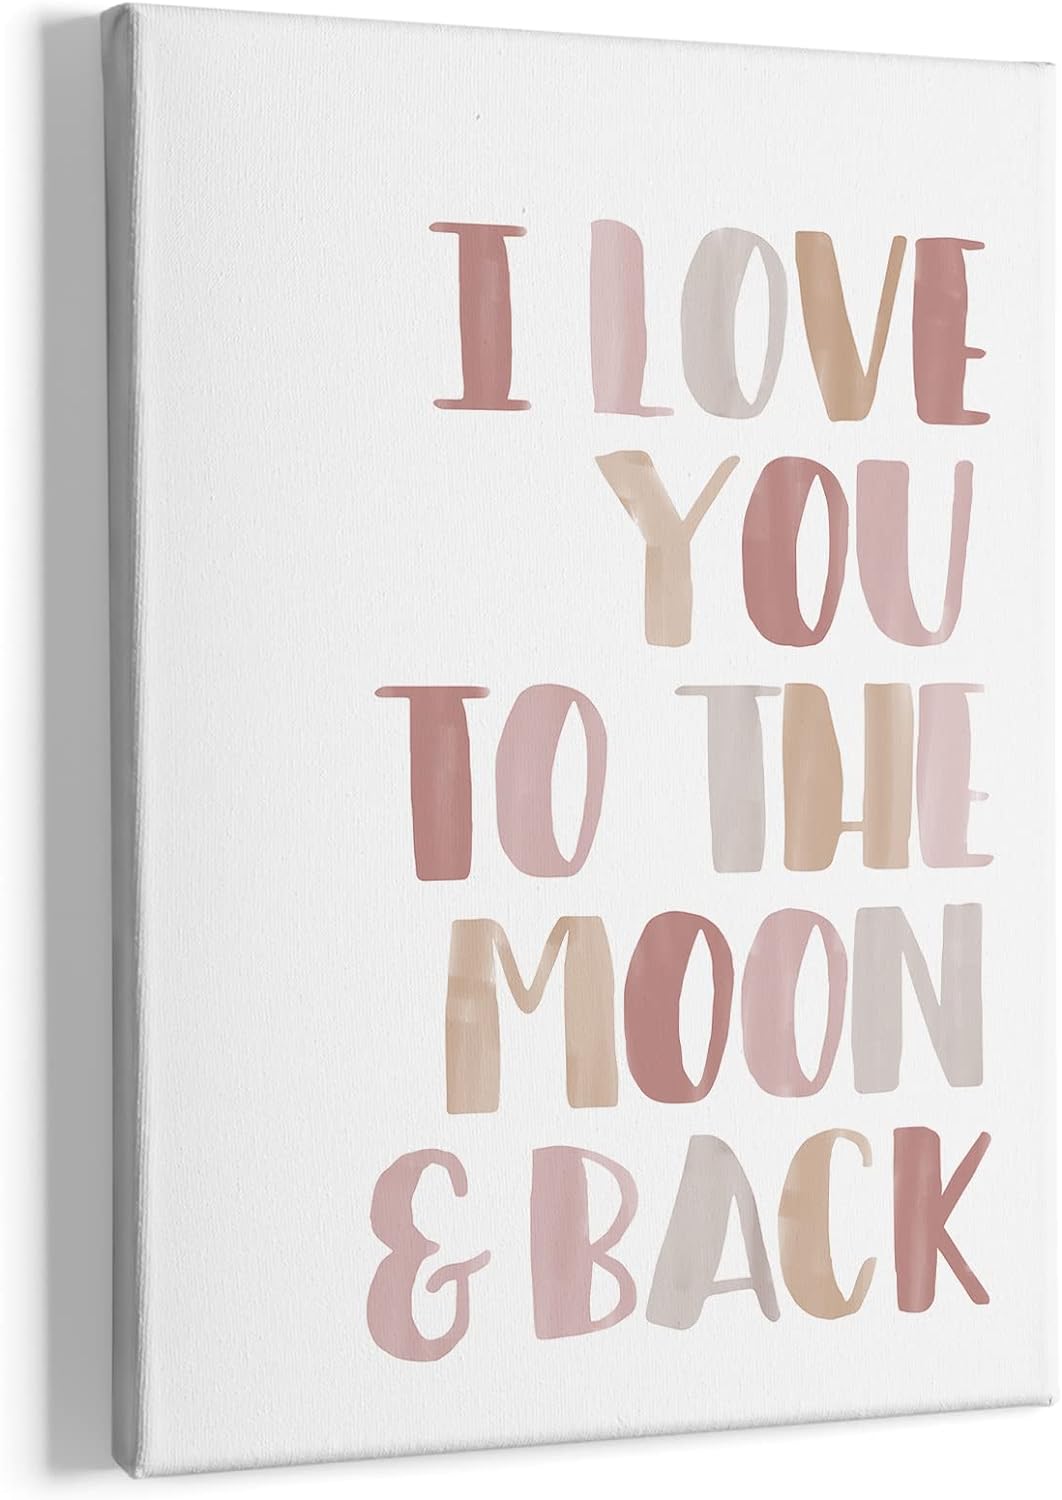 HIWX I Love You To The Moon And Back Positive Quote Framed Canvas Painting Wall Art Decor, Love Sign Wall Art Artwork Home Decoration For Living Room Bedroom Nursery 11x14 Inch